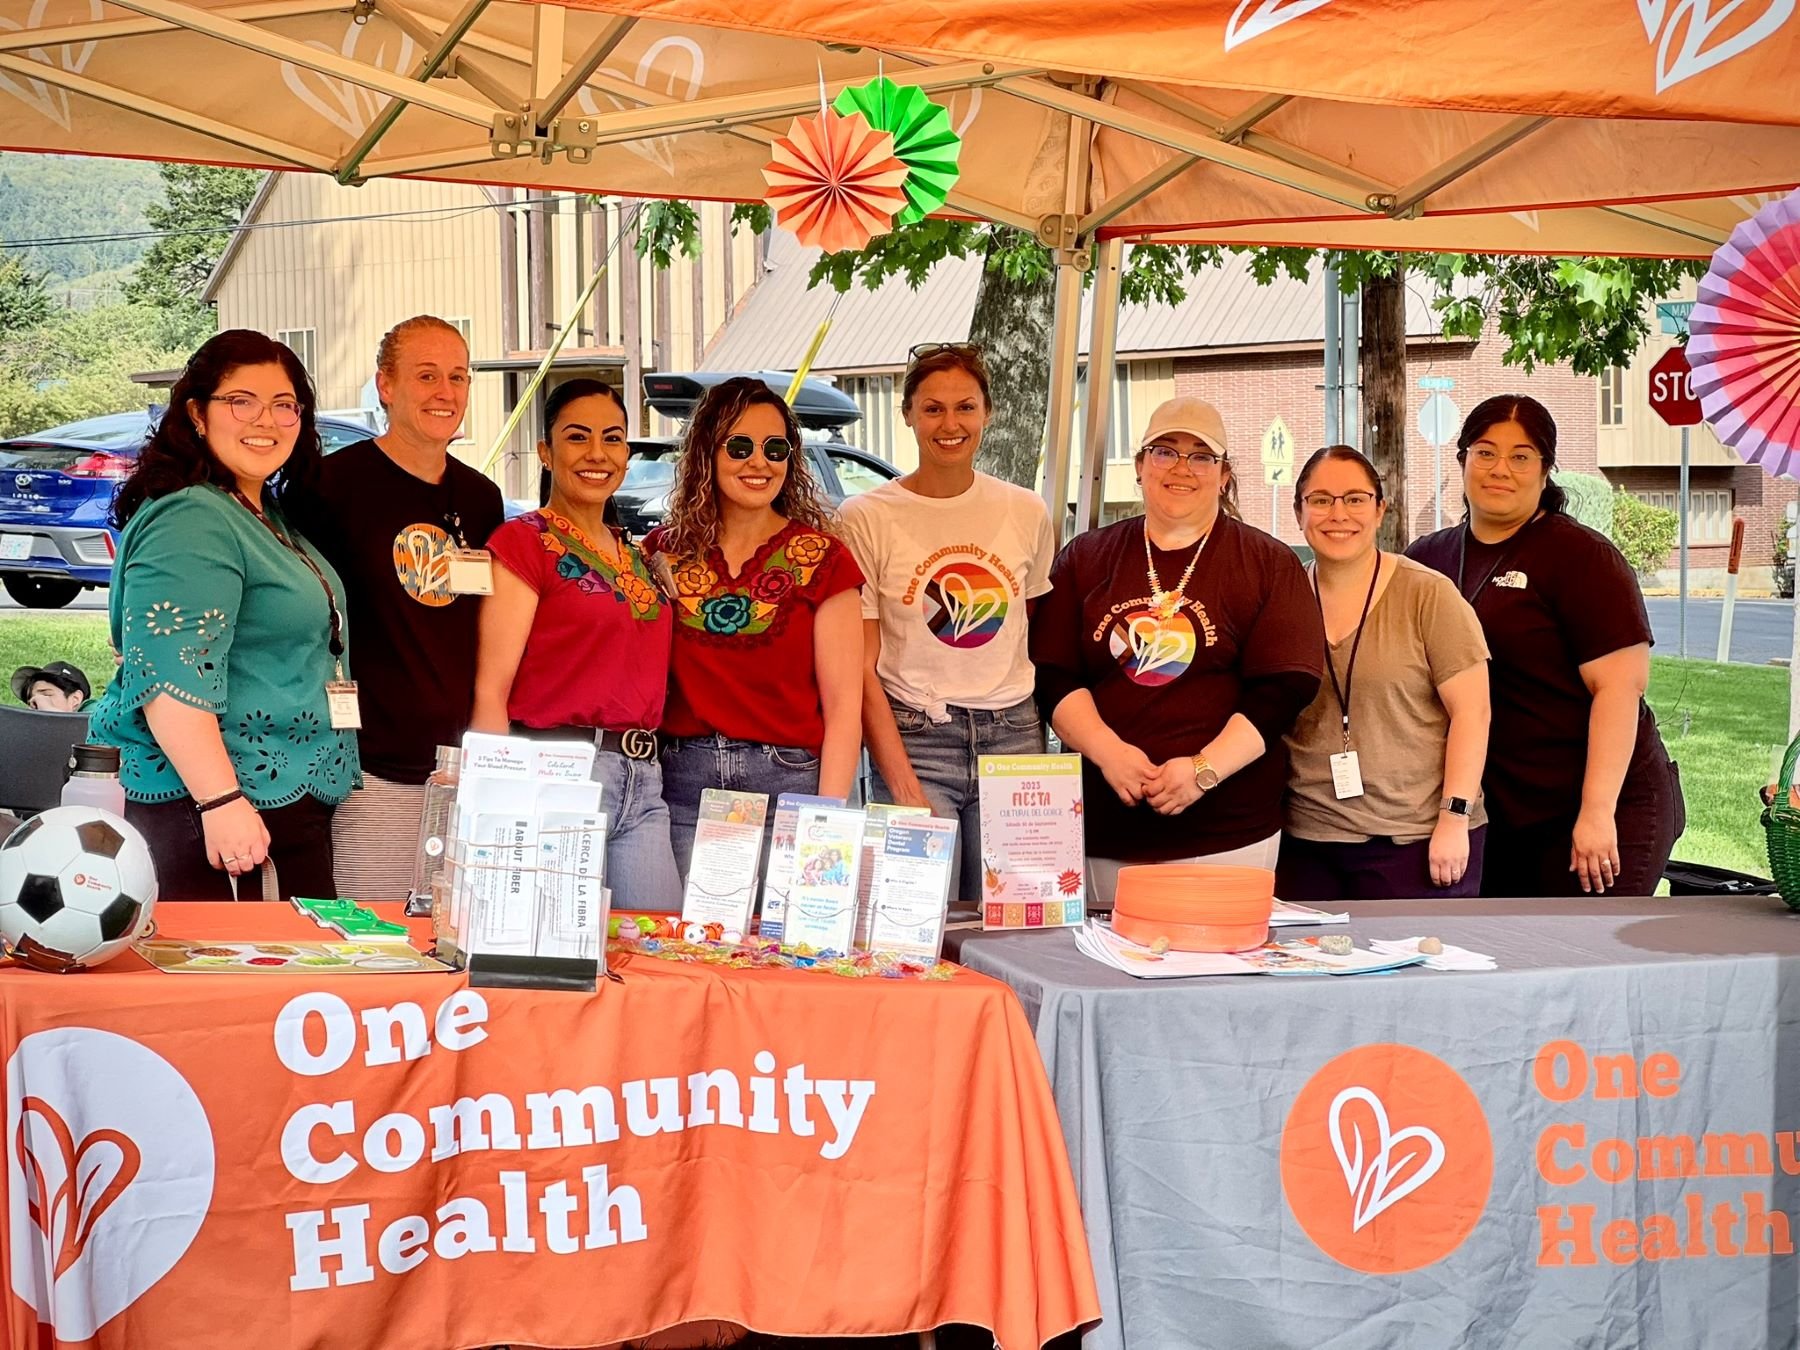 The One Community Health team was very well represented.